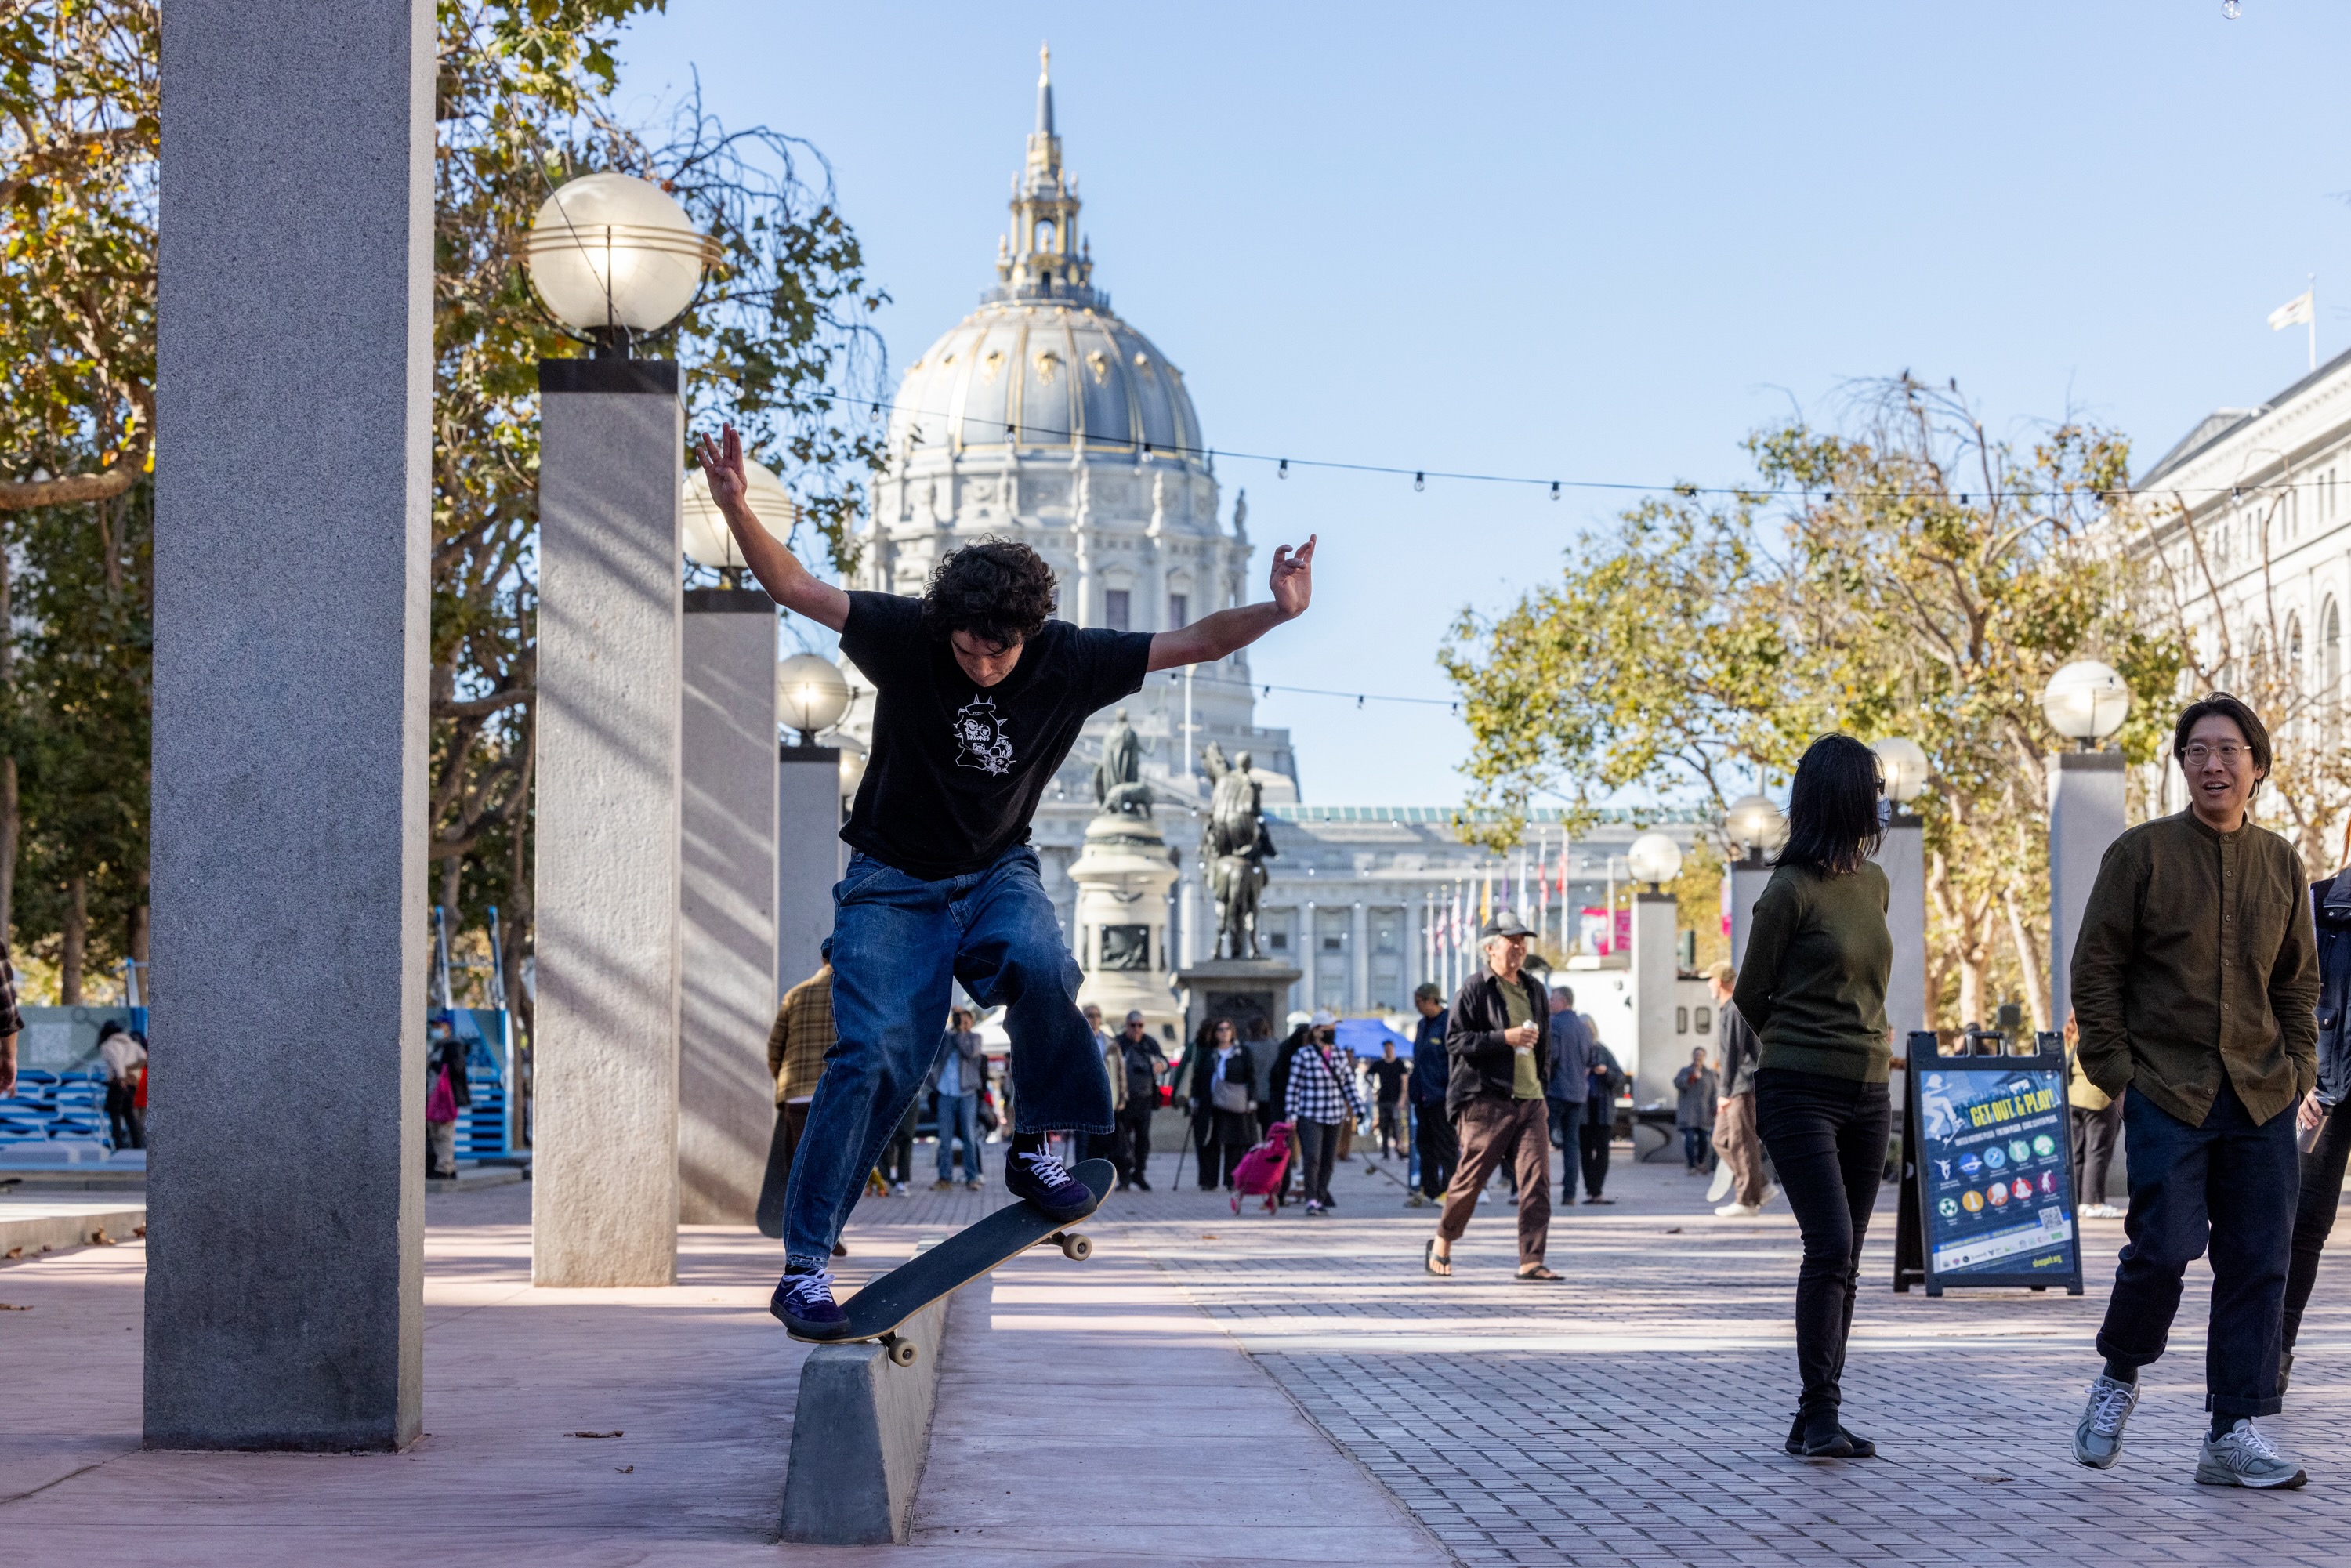 A person on a skateboard does a trick off a jump on a red brick skate park at UN Plaza with City Hall in the background on a sunny day in downtown San Francisco.